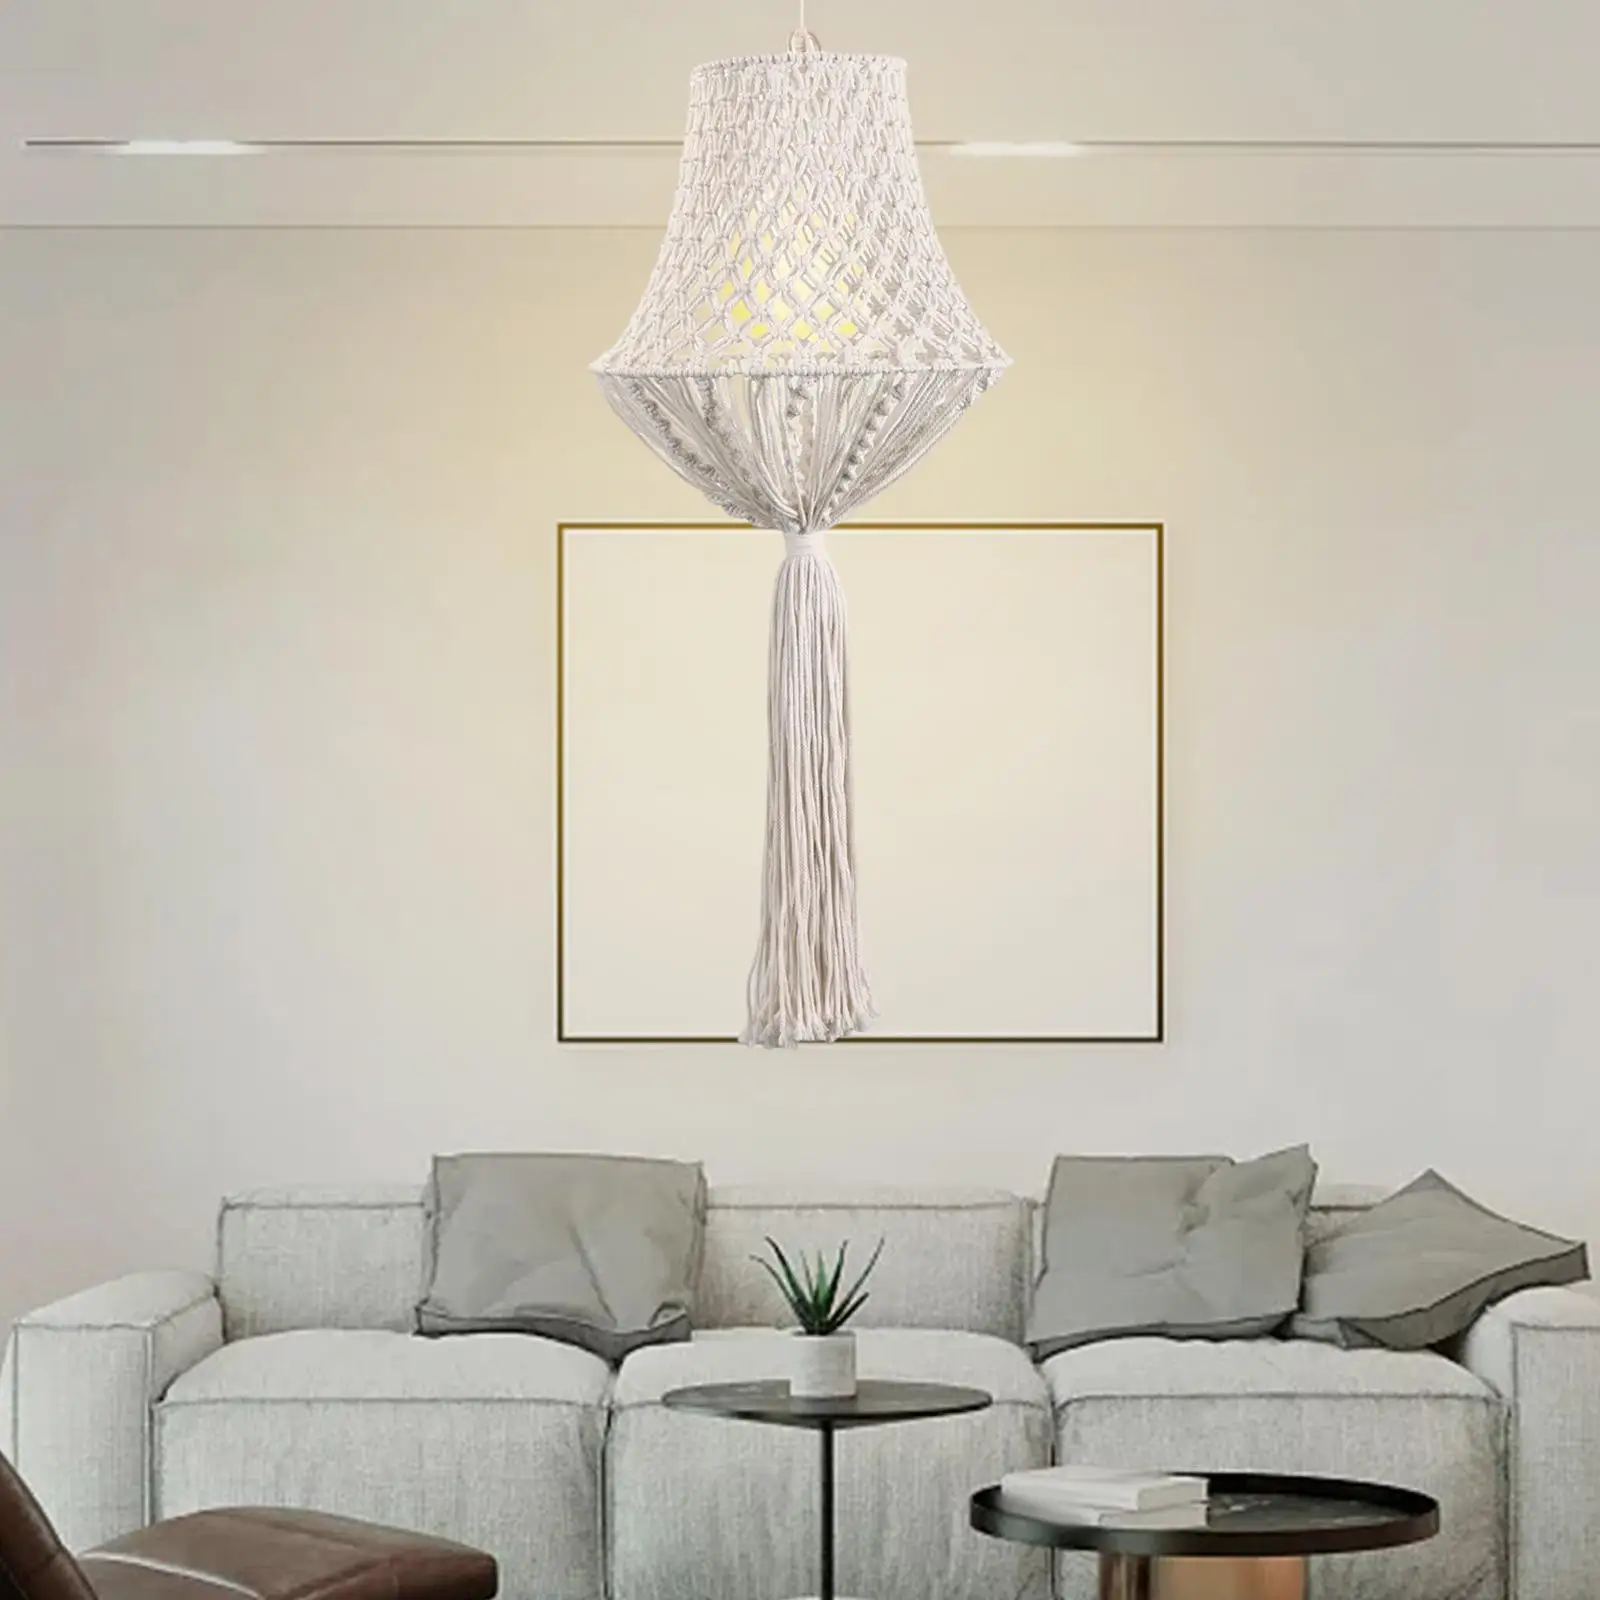 Macrame Lamp Shade Woven Light Shade Fitting Hanging Pendant Light Cover Chandelier Lampshade for Living Room Home Decorative